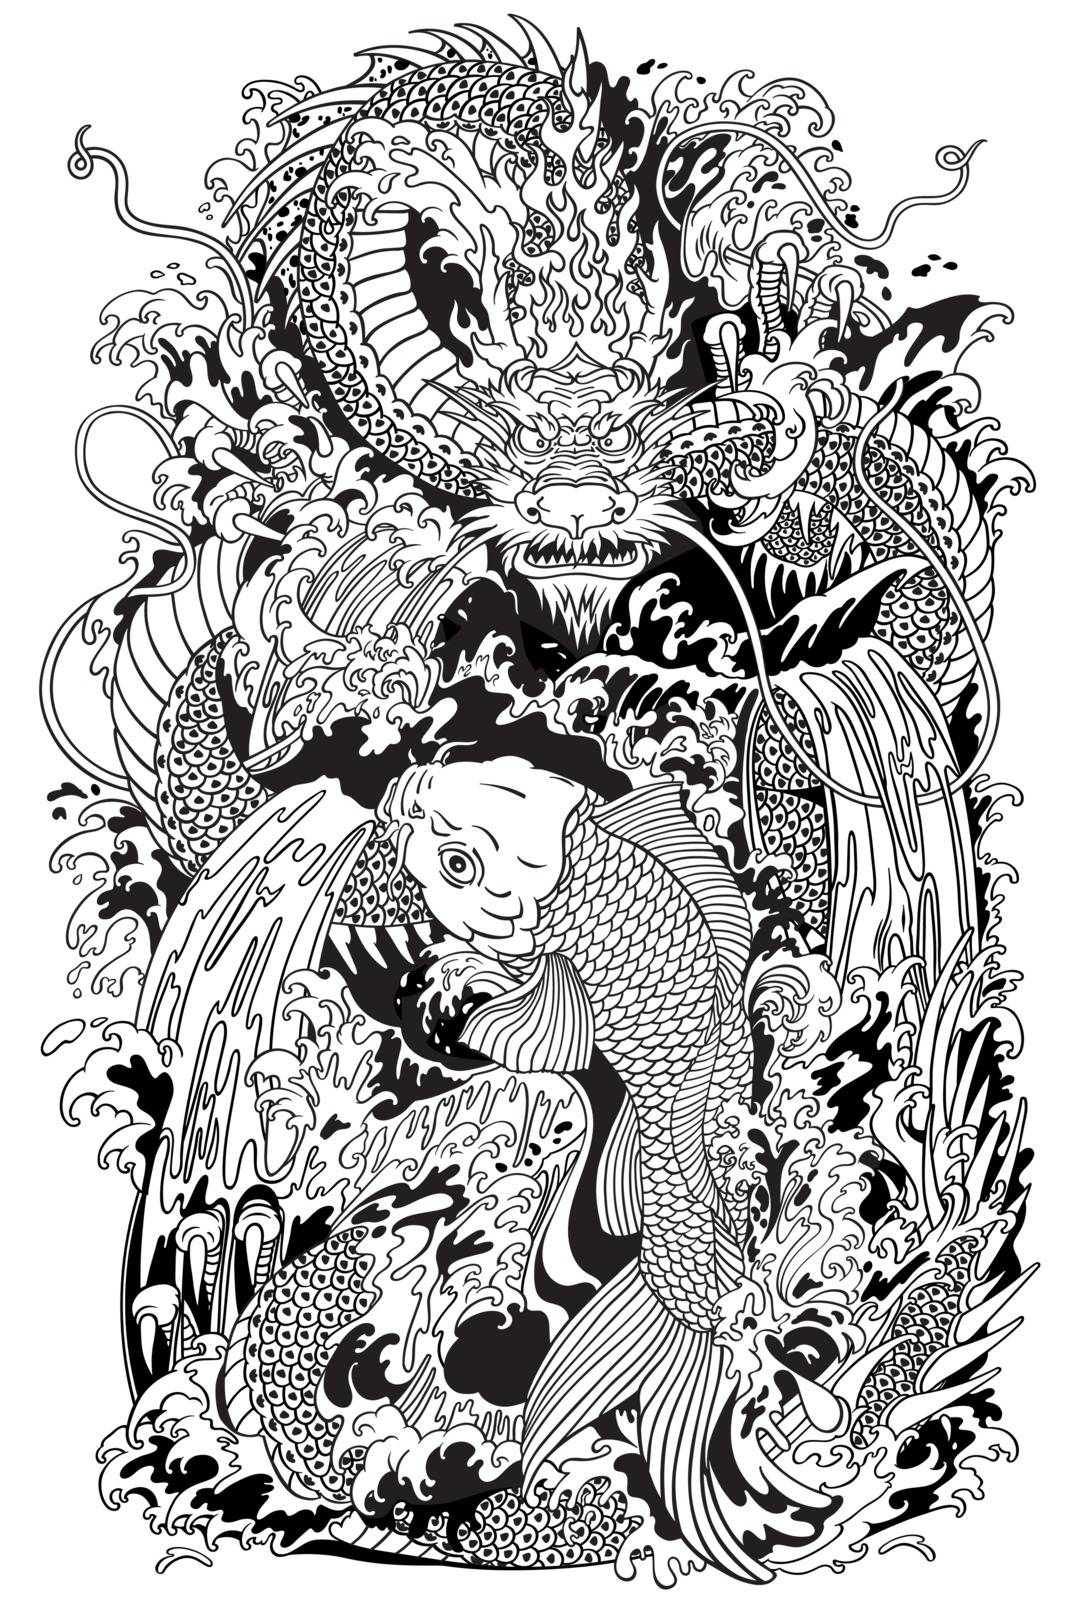 Asian dragon and koi carp fish which is trying to reach the top of the waterfall. Black and white tattoo style vector illustration according to ancient Chinese and Japanese myth